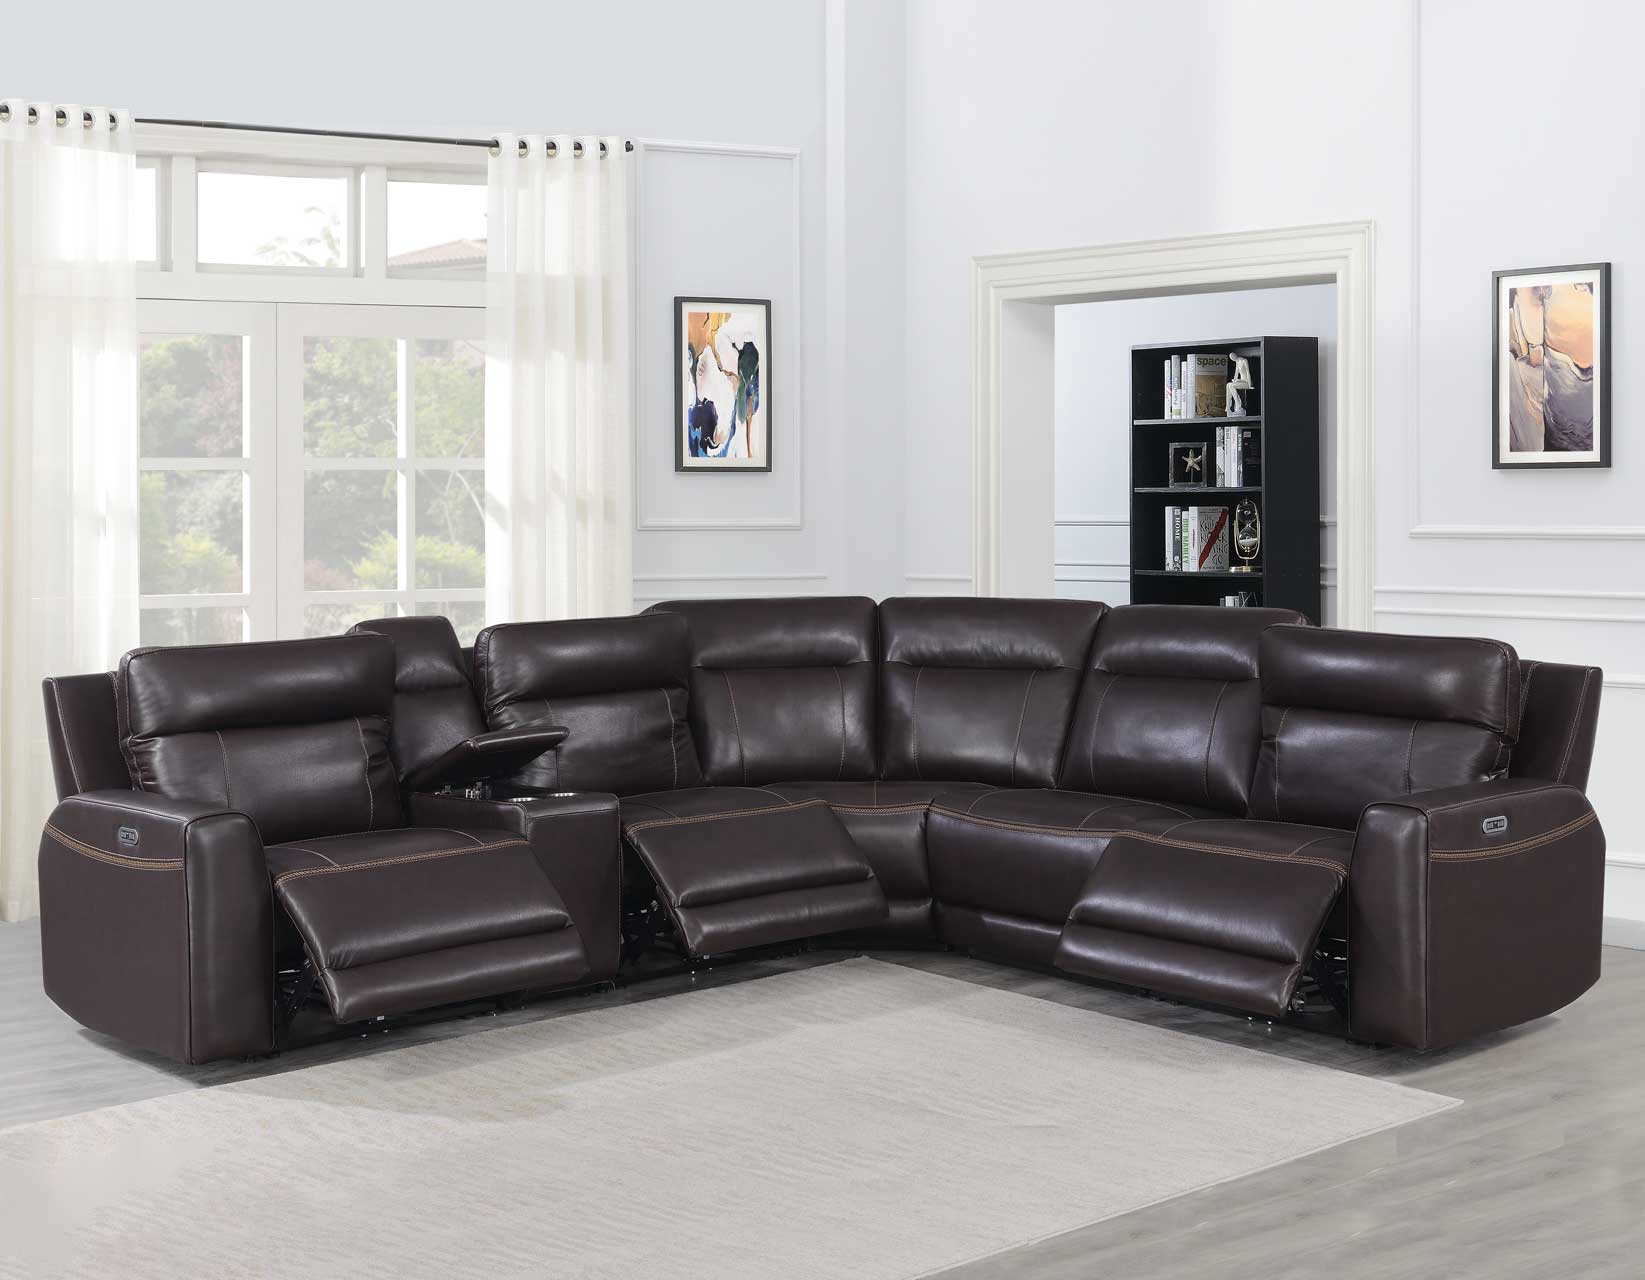 Doncella Dual-Power Leather 6-Piece Sectional (LAFR,RAFR,CN,AC,AR,W) by Steve Silver